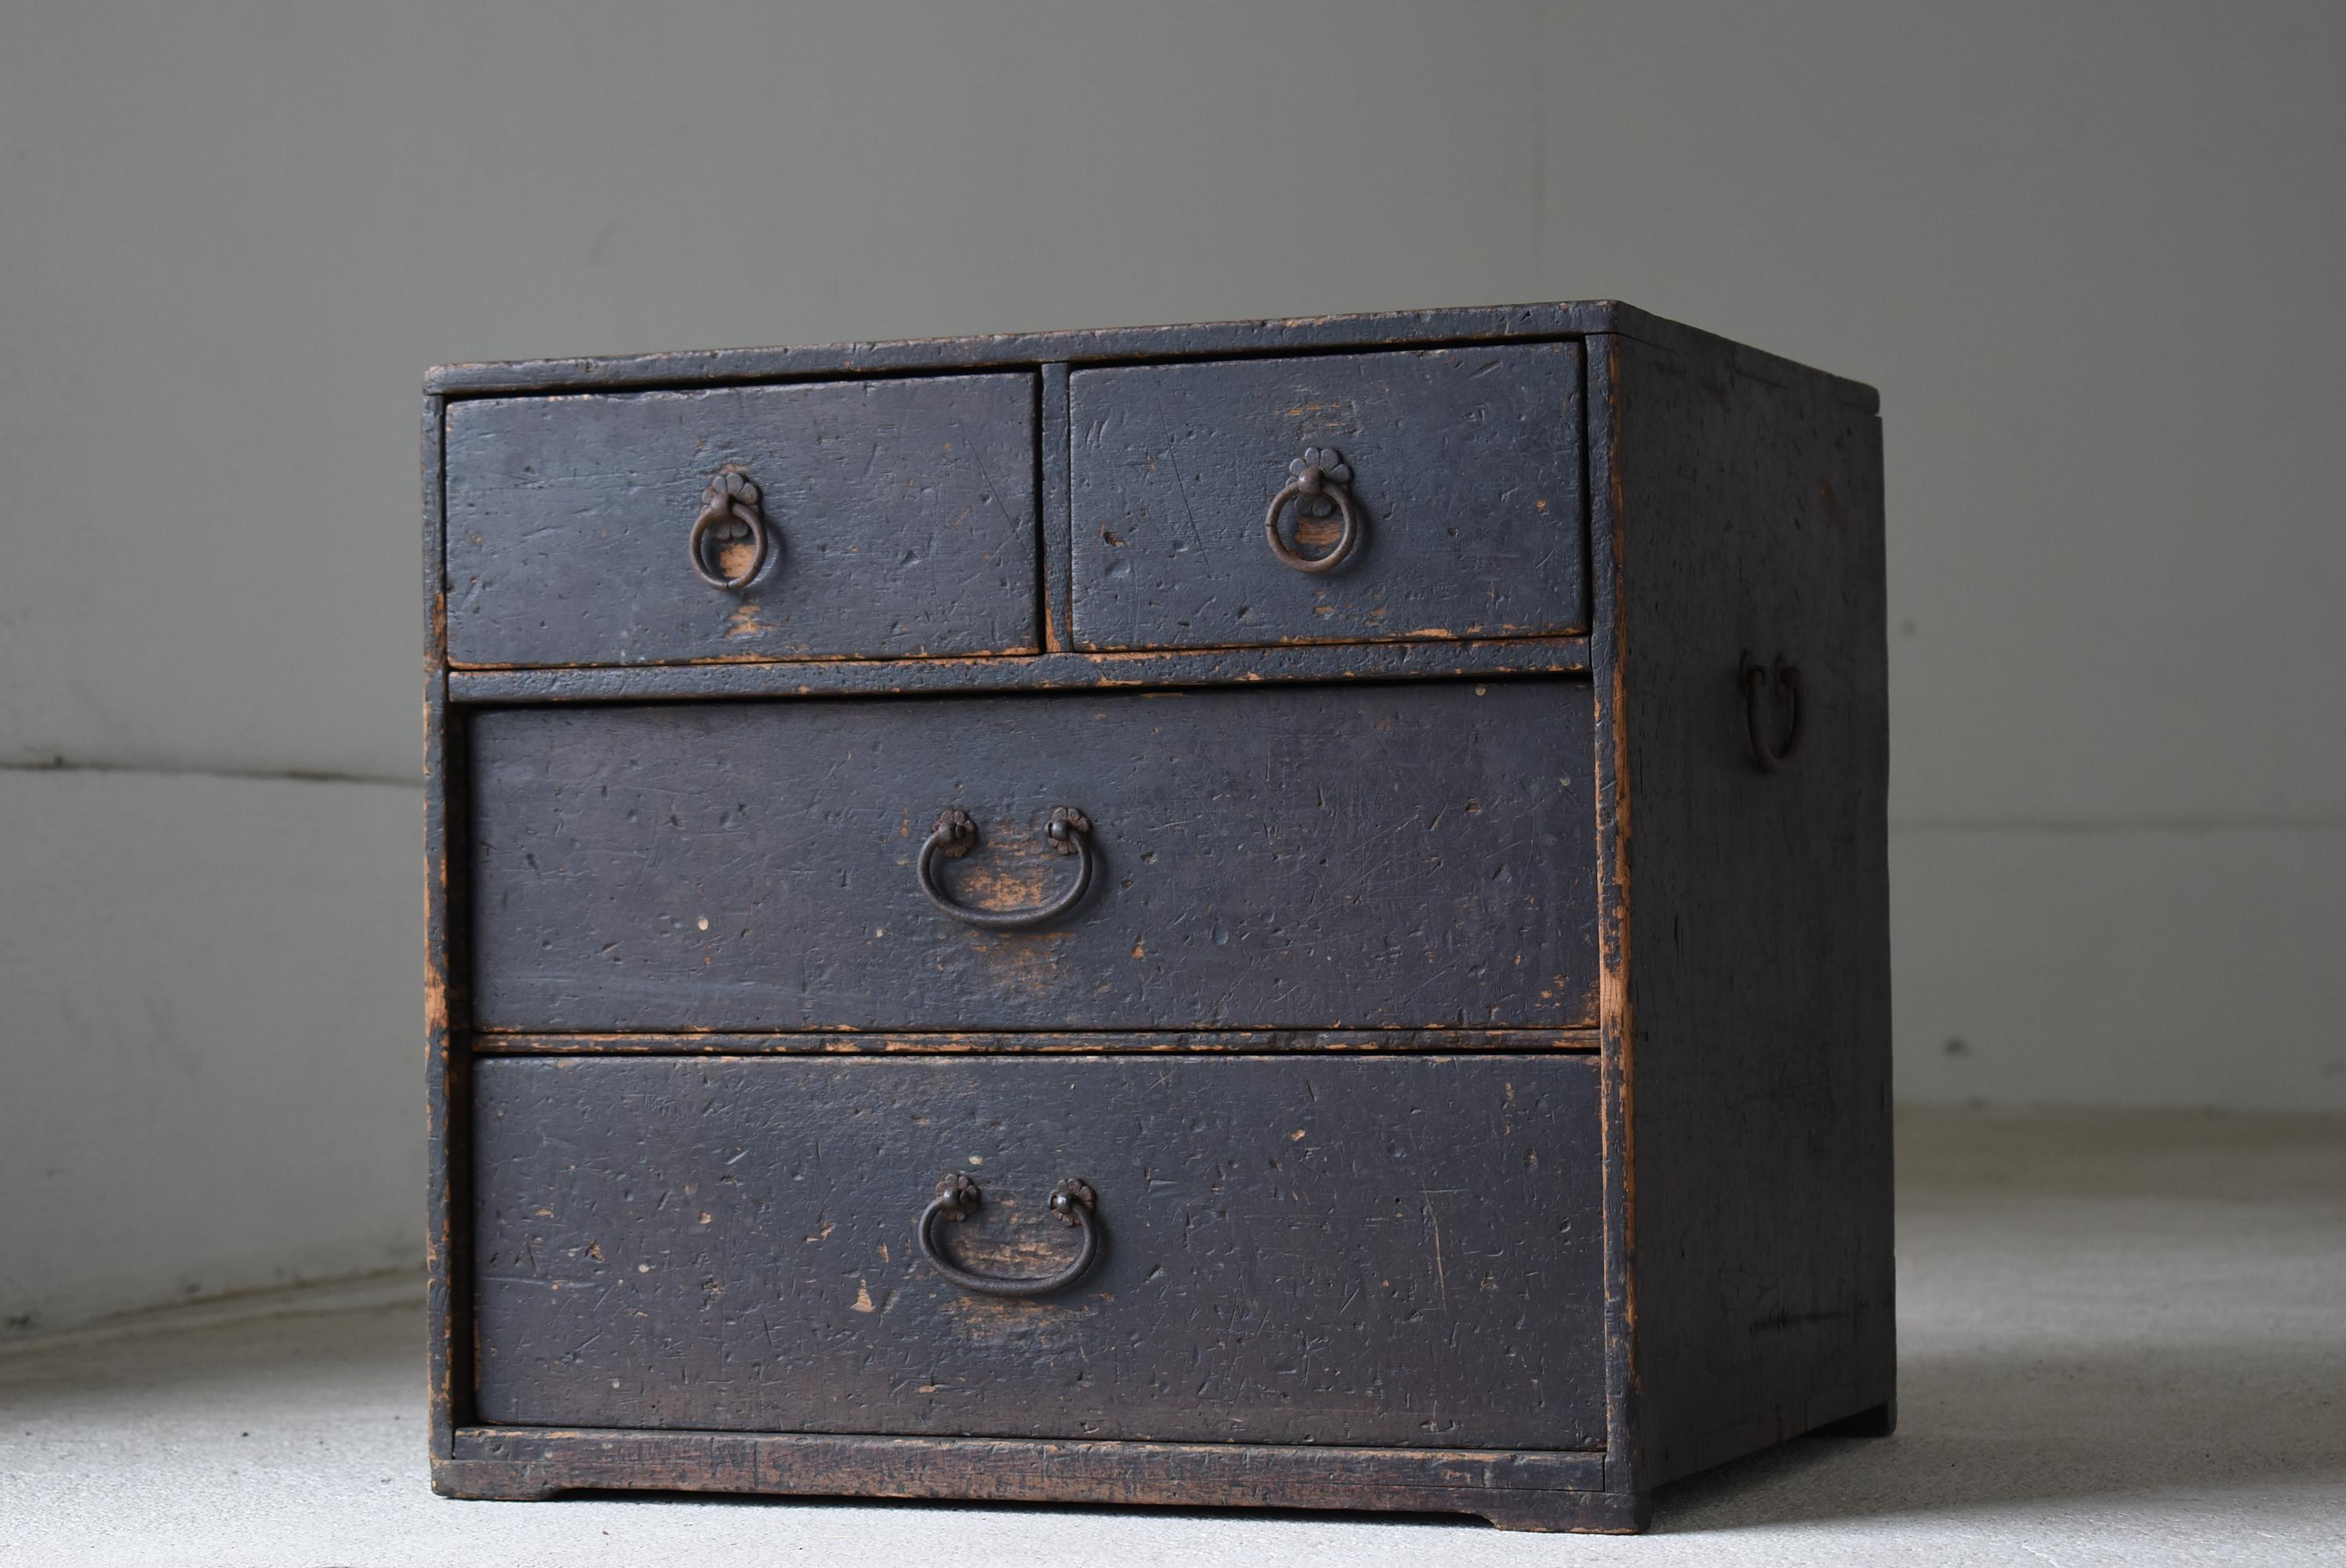 This is a very old Japanese drawer.
It is from the Meiji period (1860s-1900s).
It is made of cedar wood.

It is a rugged and beautiful drawer.
The design is simple and lean.
It is the ultimate in simplicity.
The black color is good and gives it a